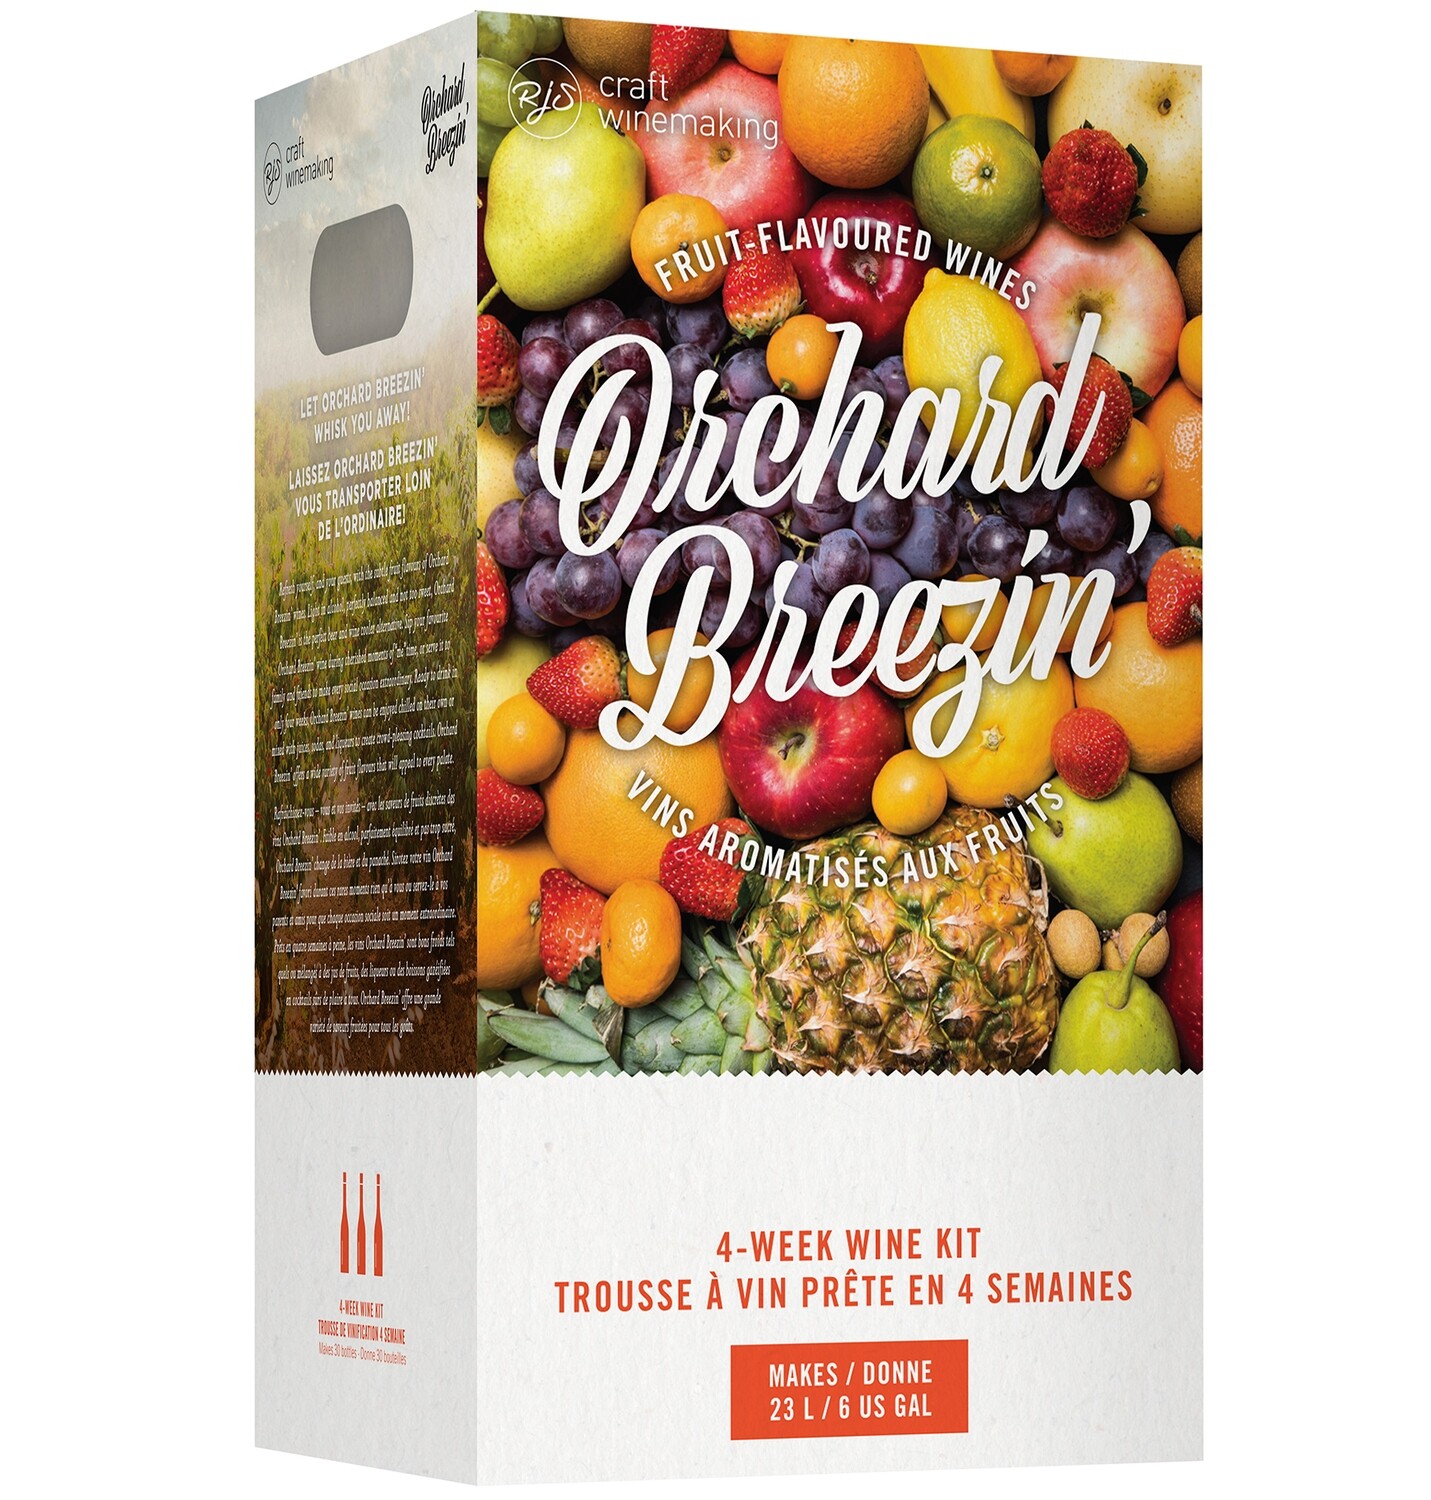 Orchard Breezin' Tropical Lime